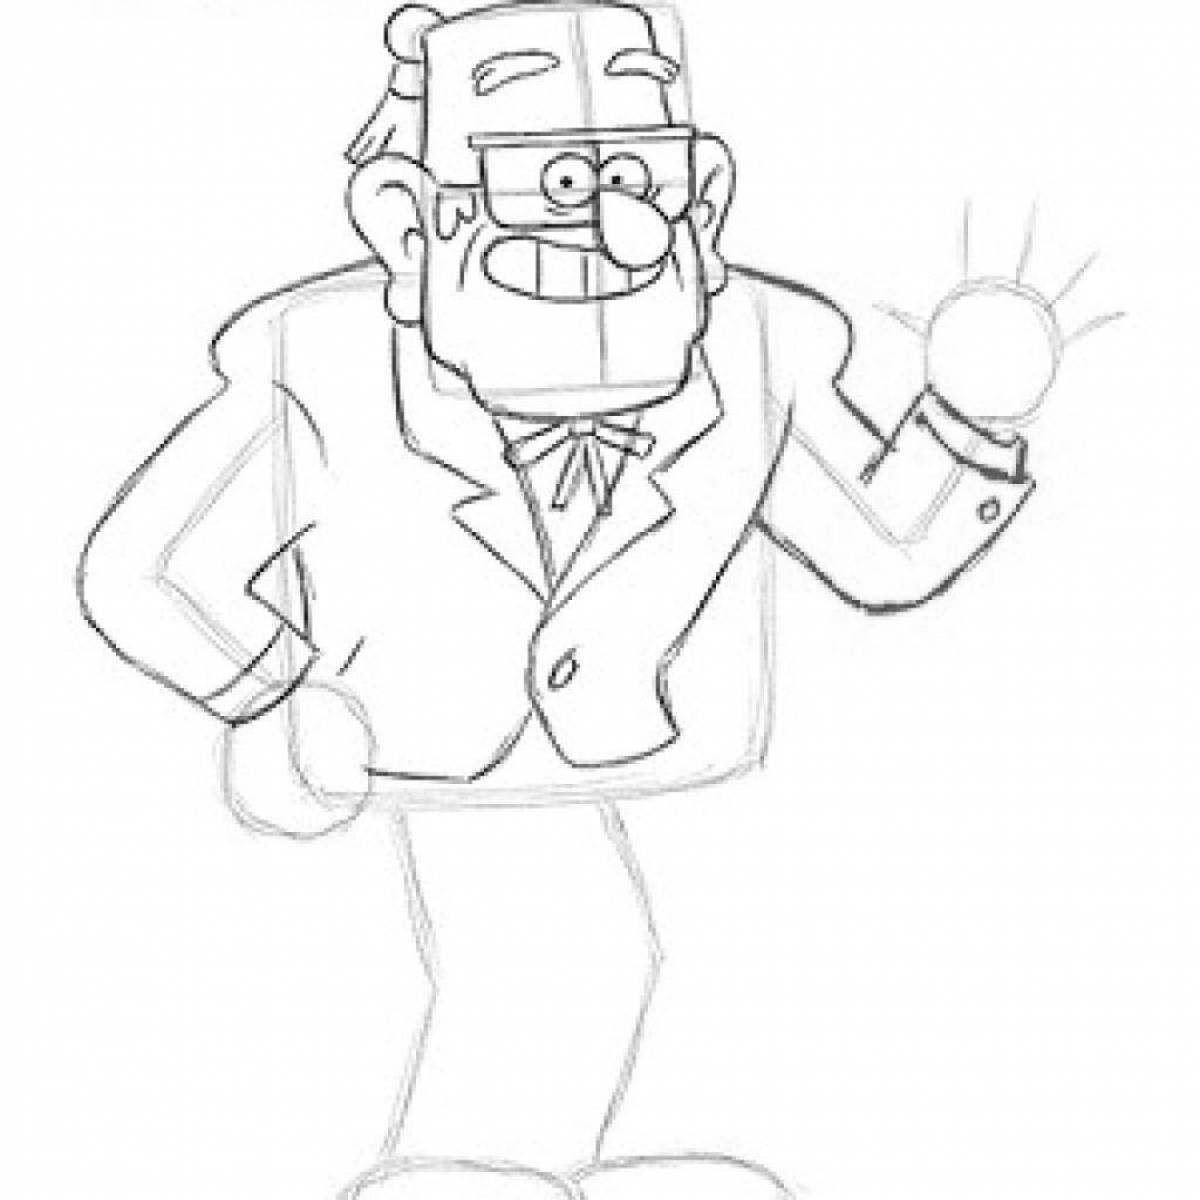 Gravity festive falls uncle stan coloring page